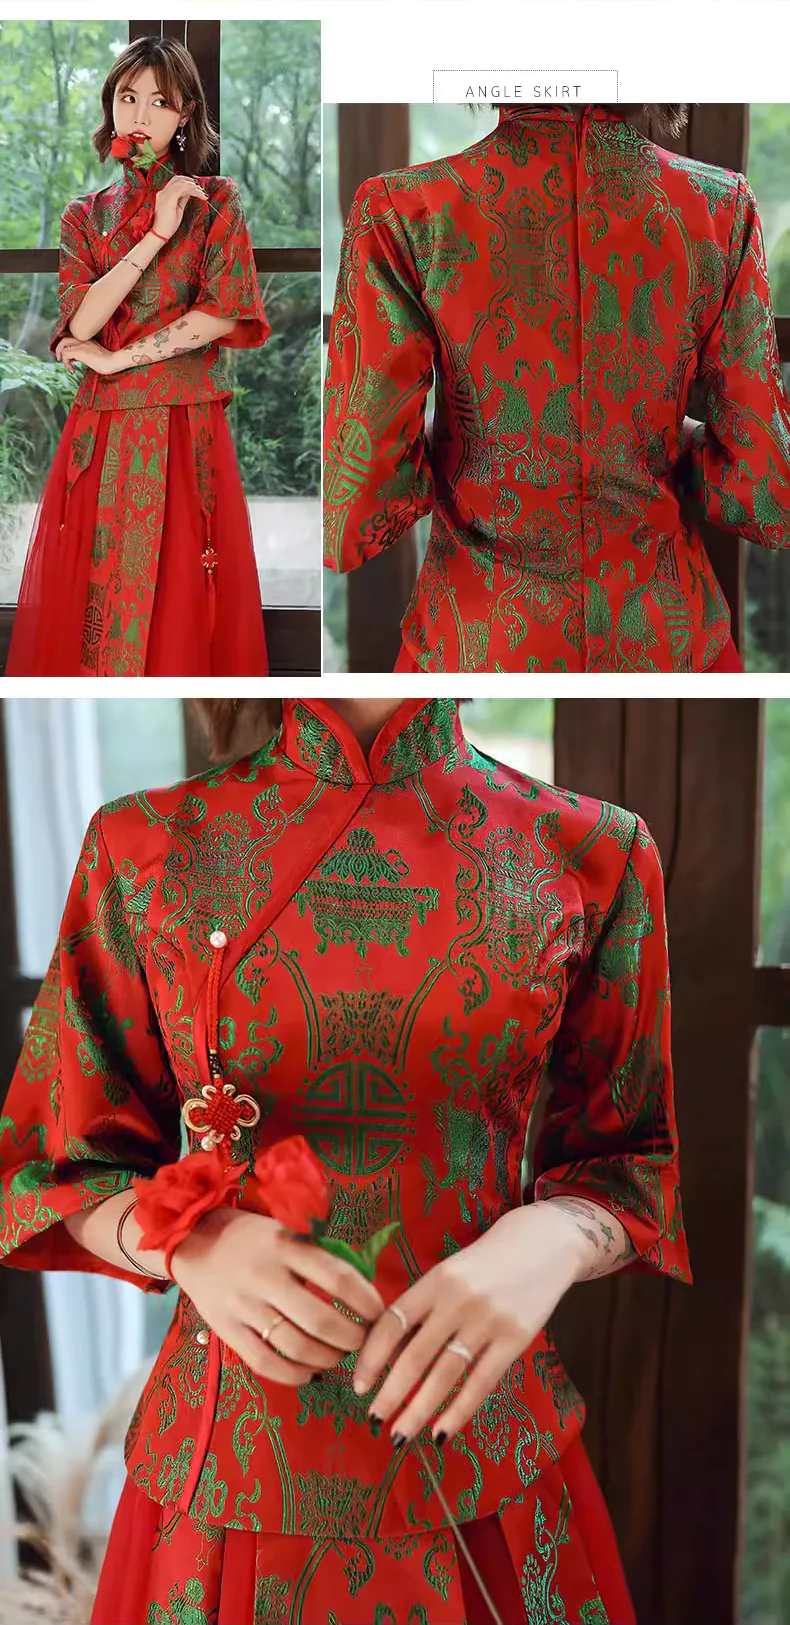 Vintage-Chinese-Style-Red-Bridesmaid-Dress-Party-Formal-Gown-for-Ladies20